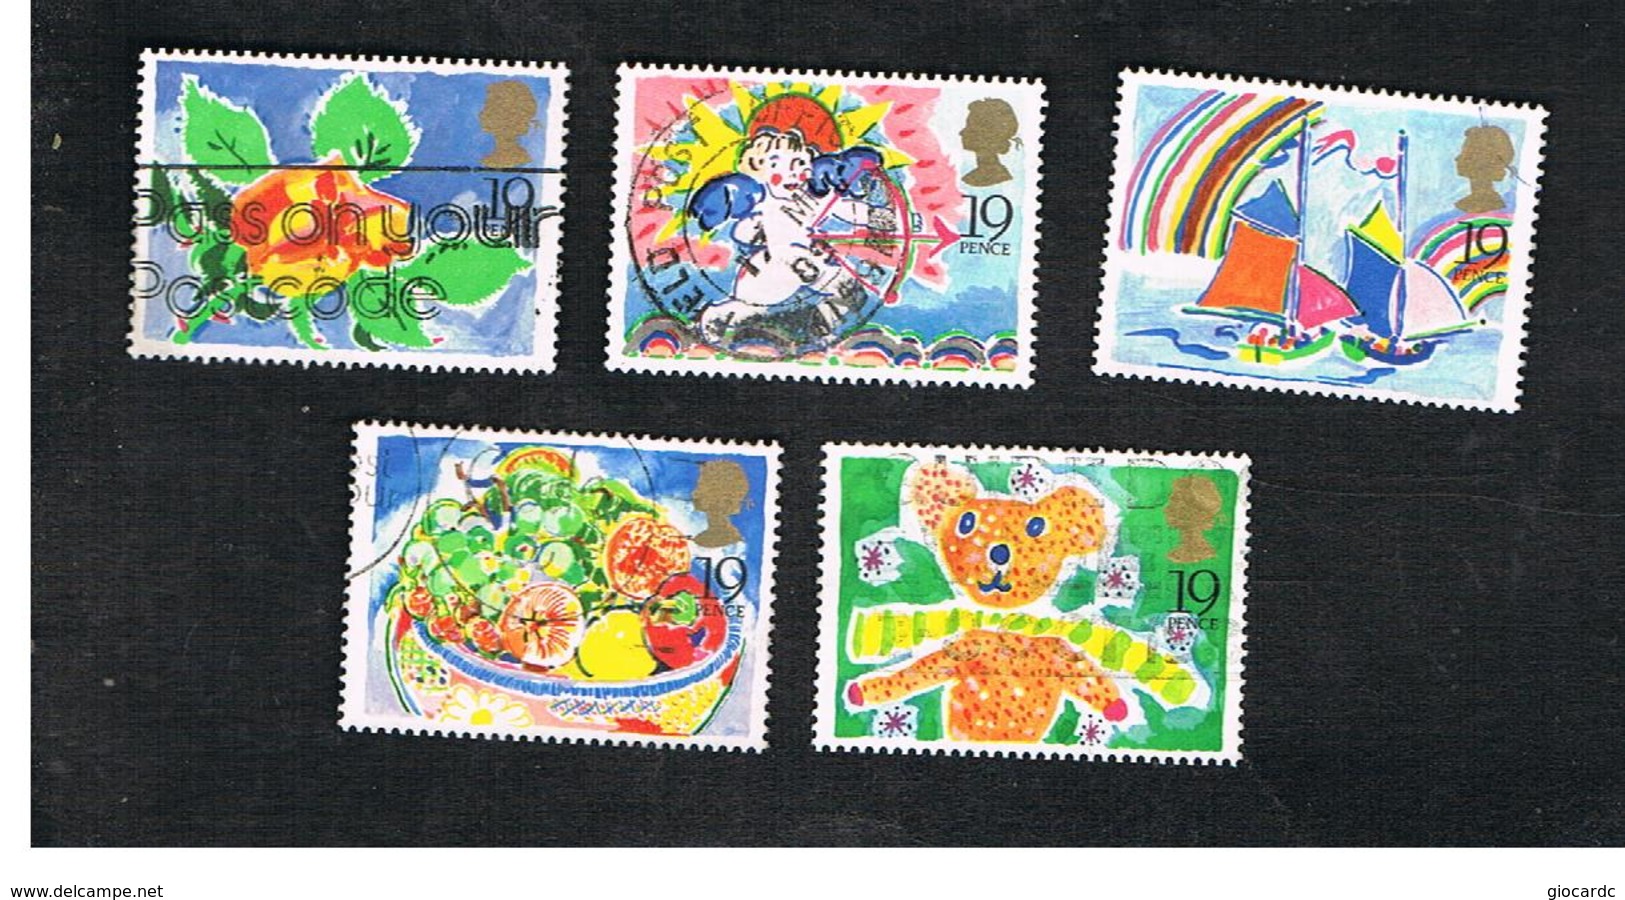 GRAN BRETAGNA (GREAT BRITAIN) - SG 1423.1427 -  1989  GREETINGS STAMPS (COMPLET SET OF 5 FROM BOOKLET)  - USED - Usati